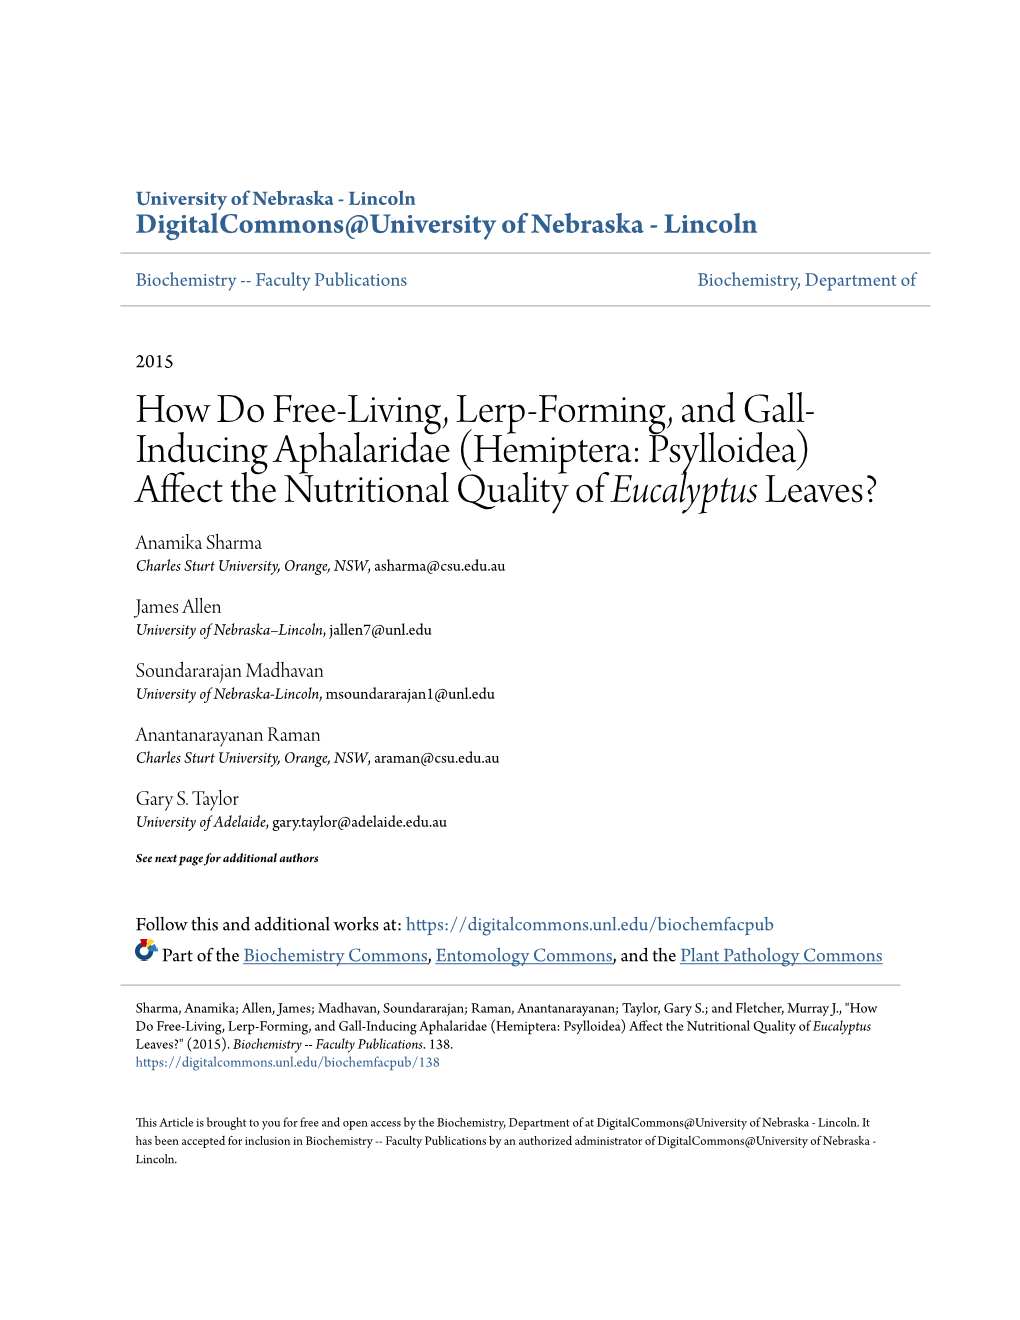 How Do Free-Living, Lerp-Forming, and Gall-Inducing Aphalaridae (Hemiptera: Psylloidea) Affect the Nutritional Quality of Eucalyptus Leaves?" (2015)